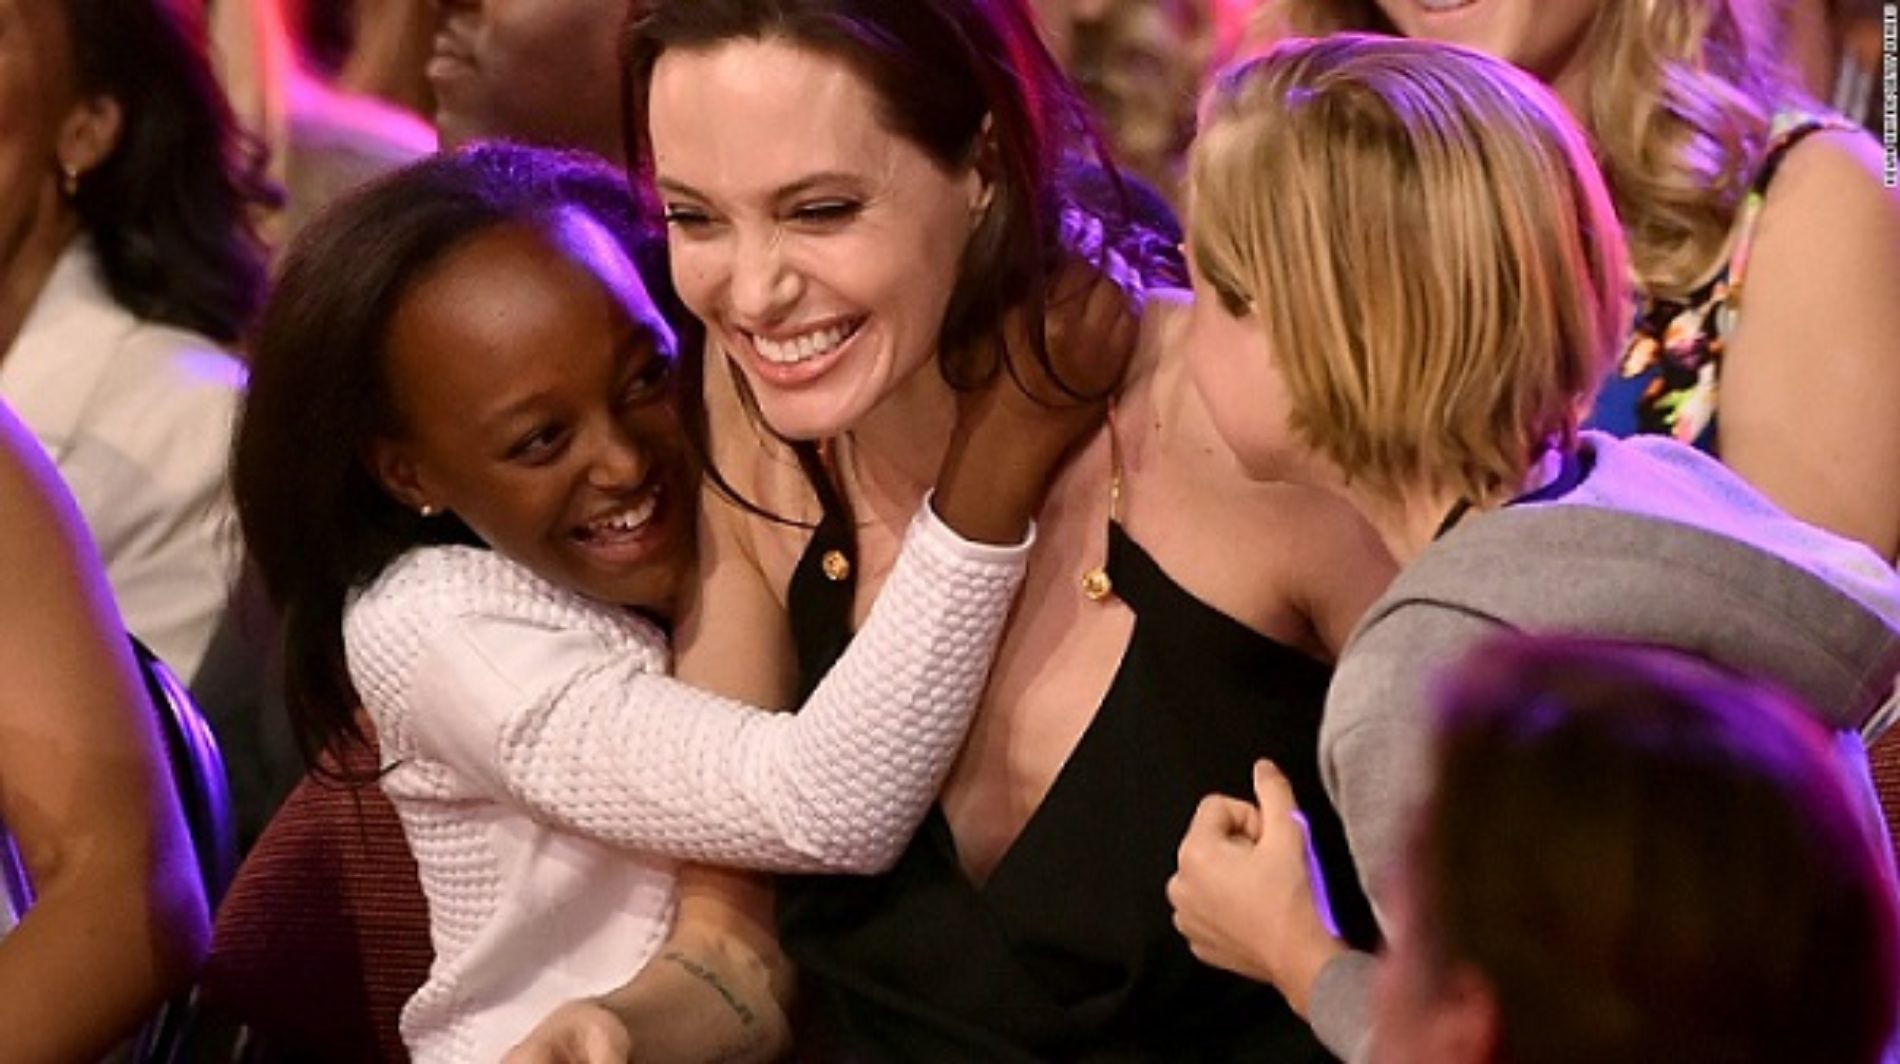 Angelina Jolie Encourages ‘Being Different’ During Kids Choice Award Speech